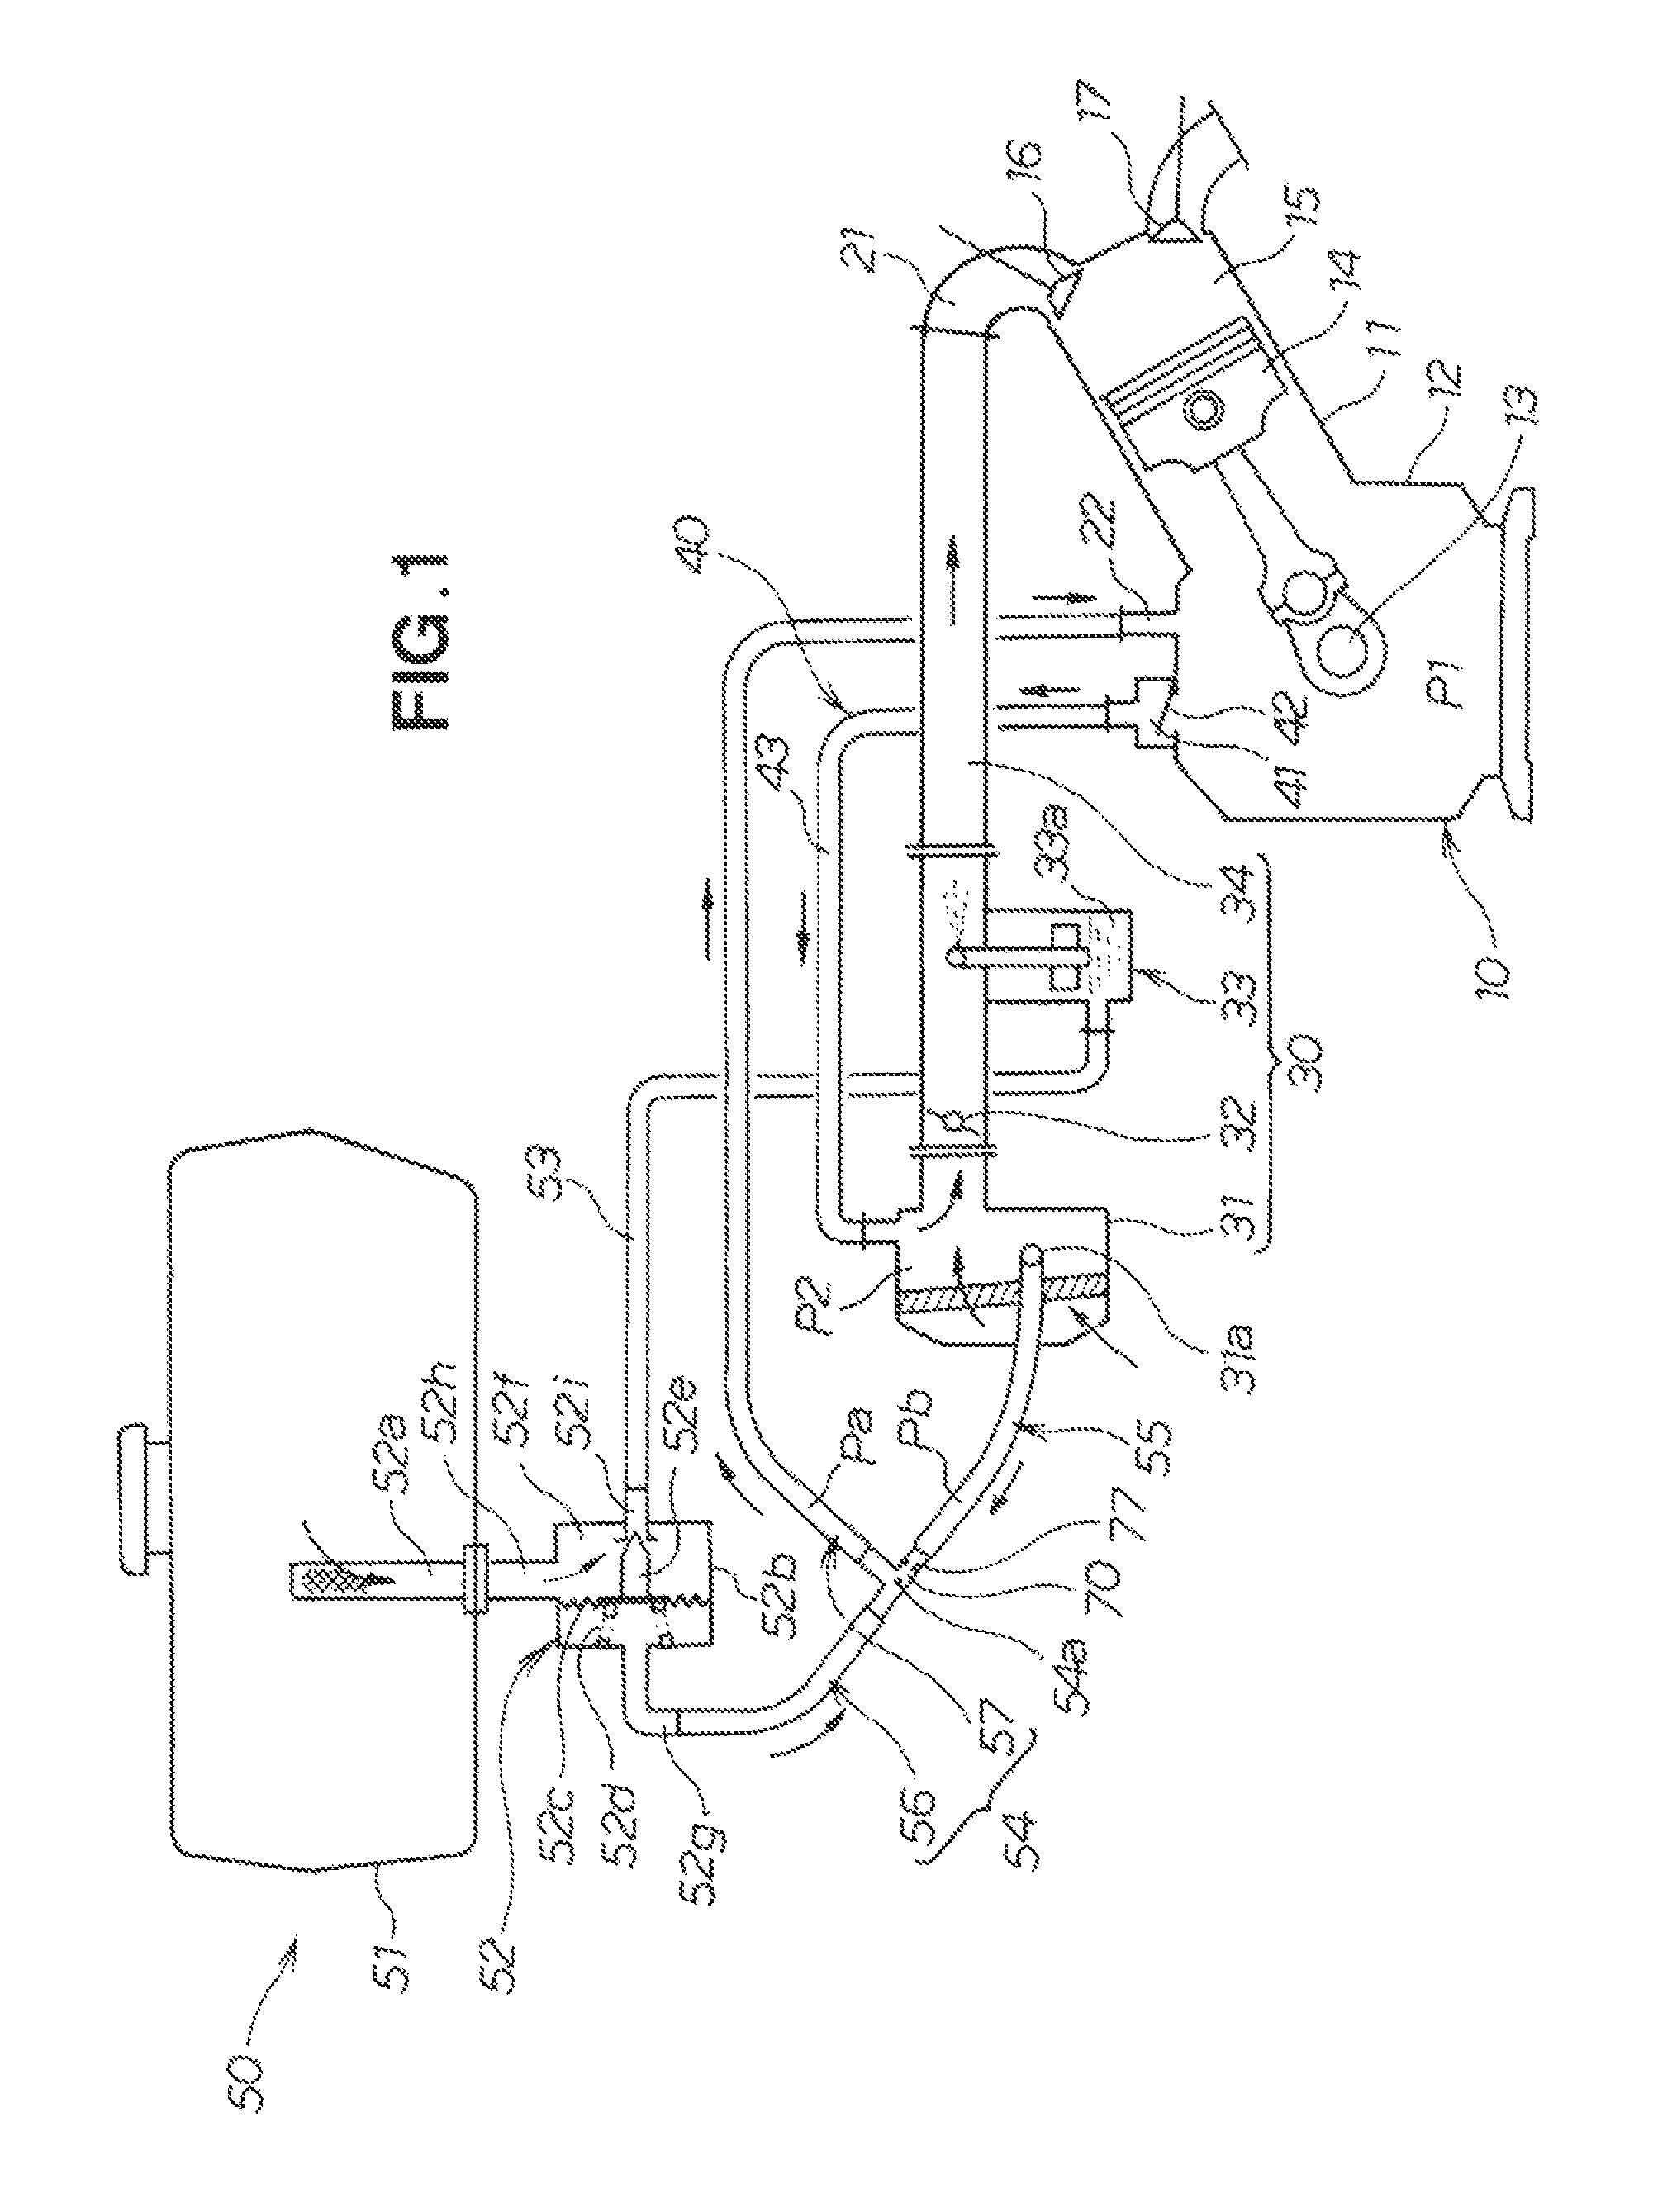 Fuel supplying apparatus for internal combustion engine